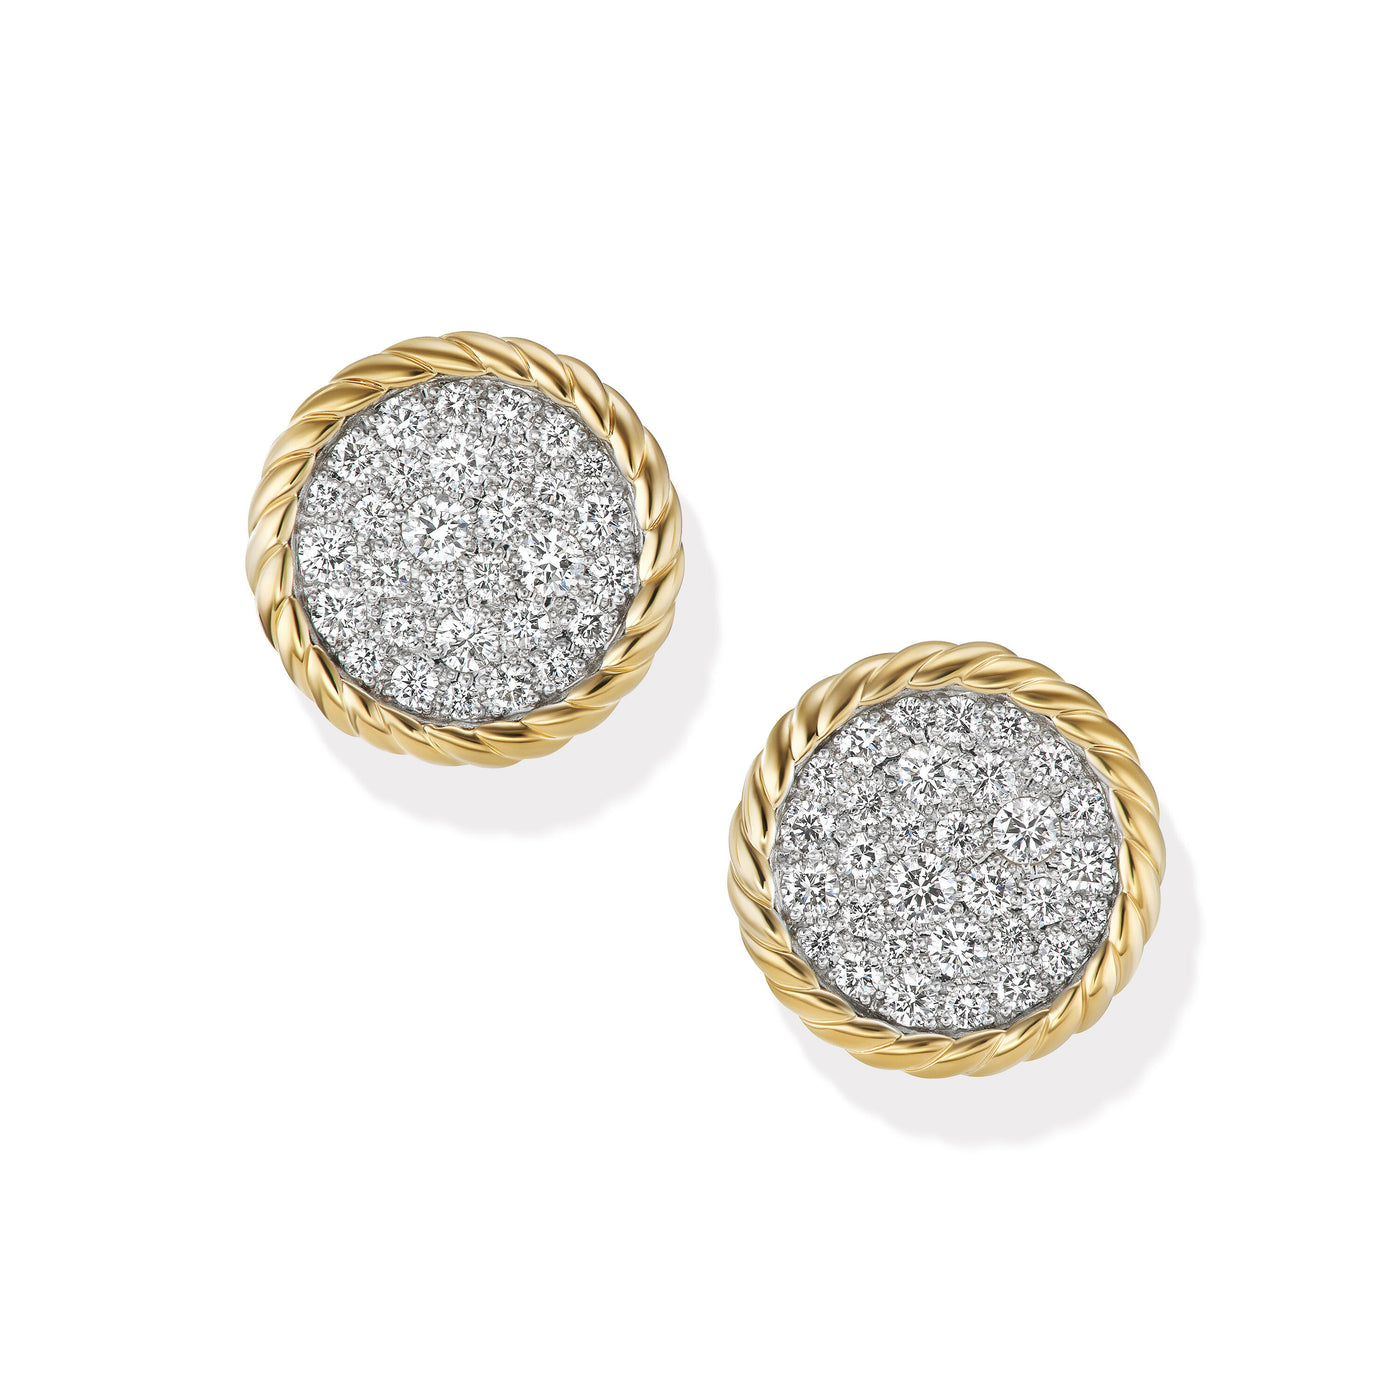 DY Elements® Button Stud Earrings in 18K Yellow Gold with Diamonds\, 13.6mm